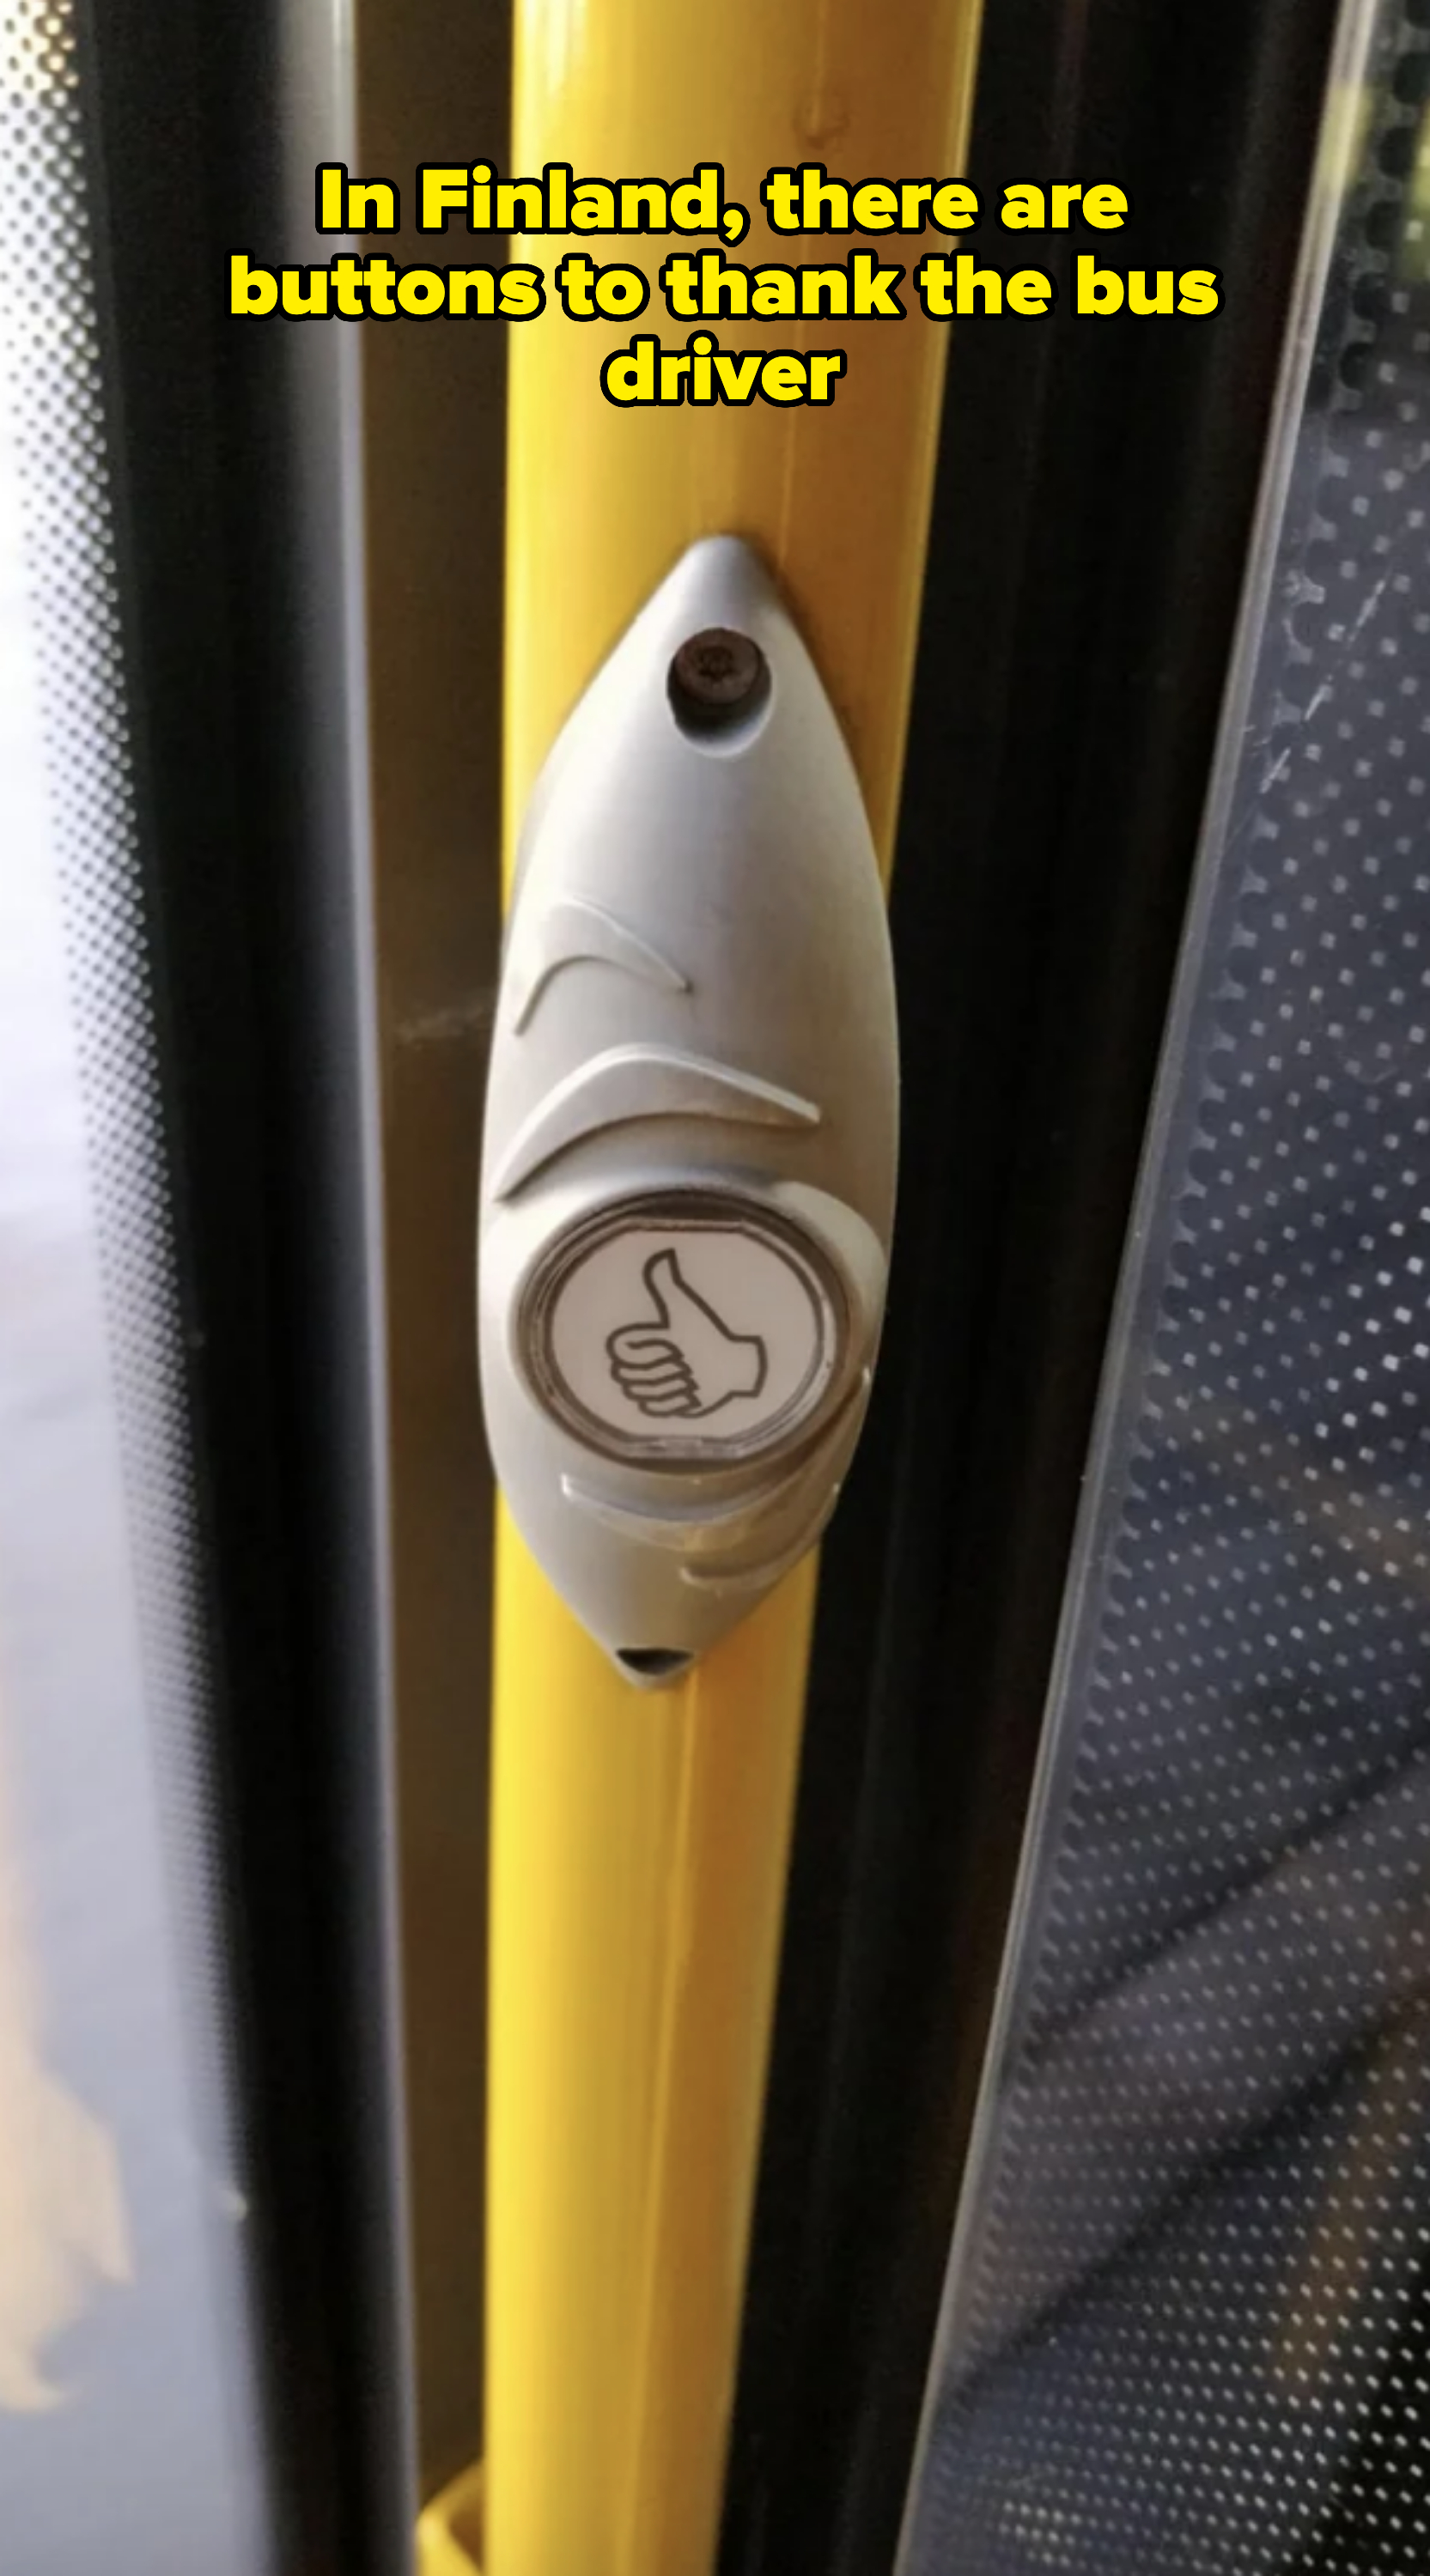 Button with thumb-up icon to request bus stop